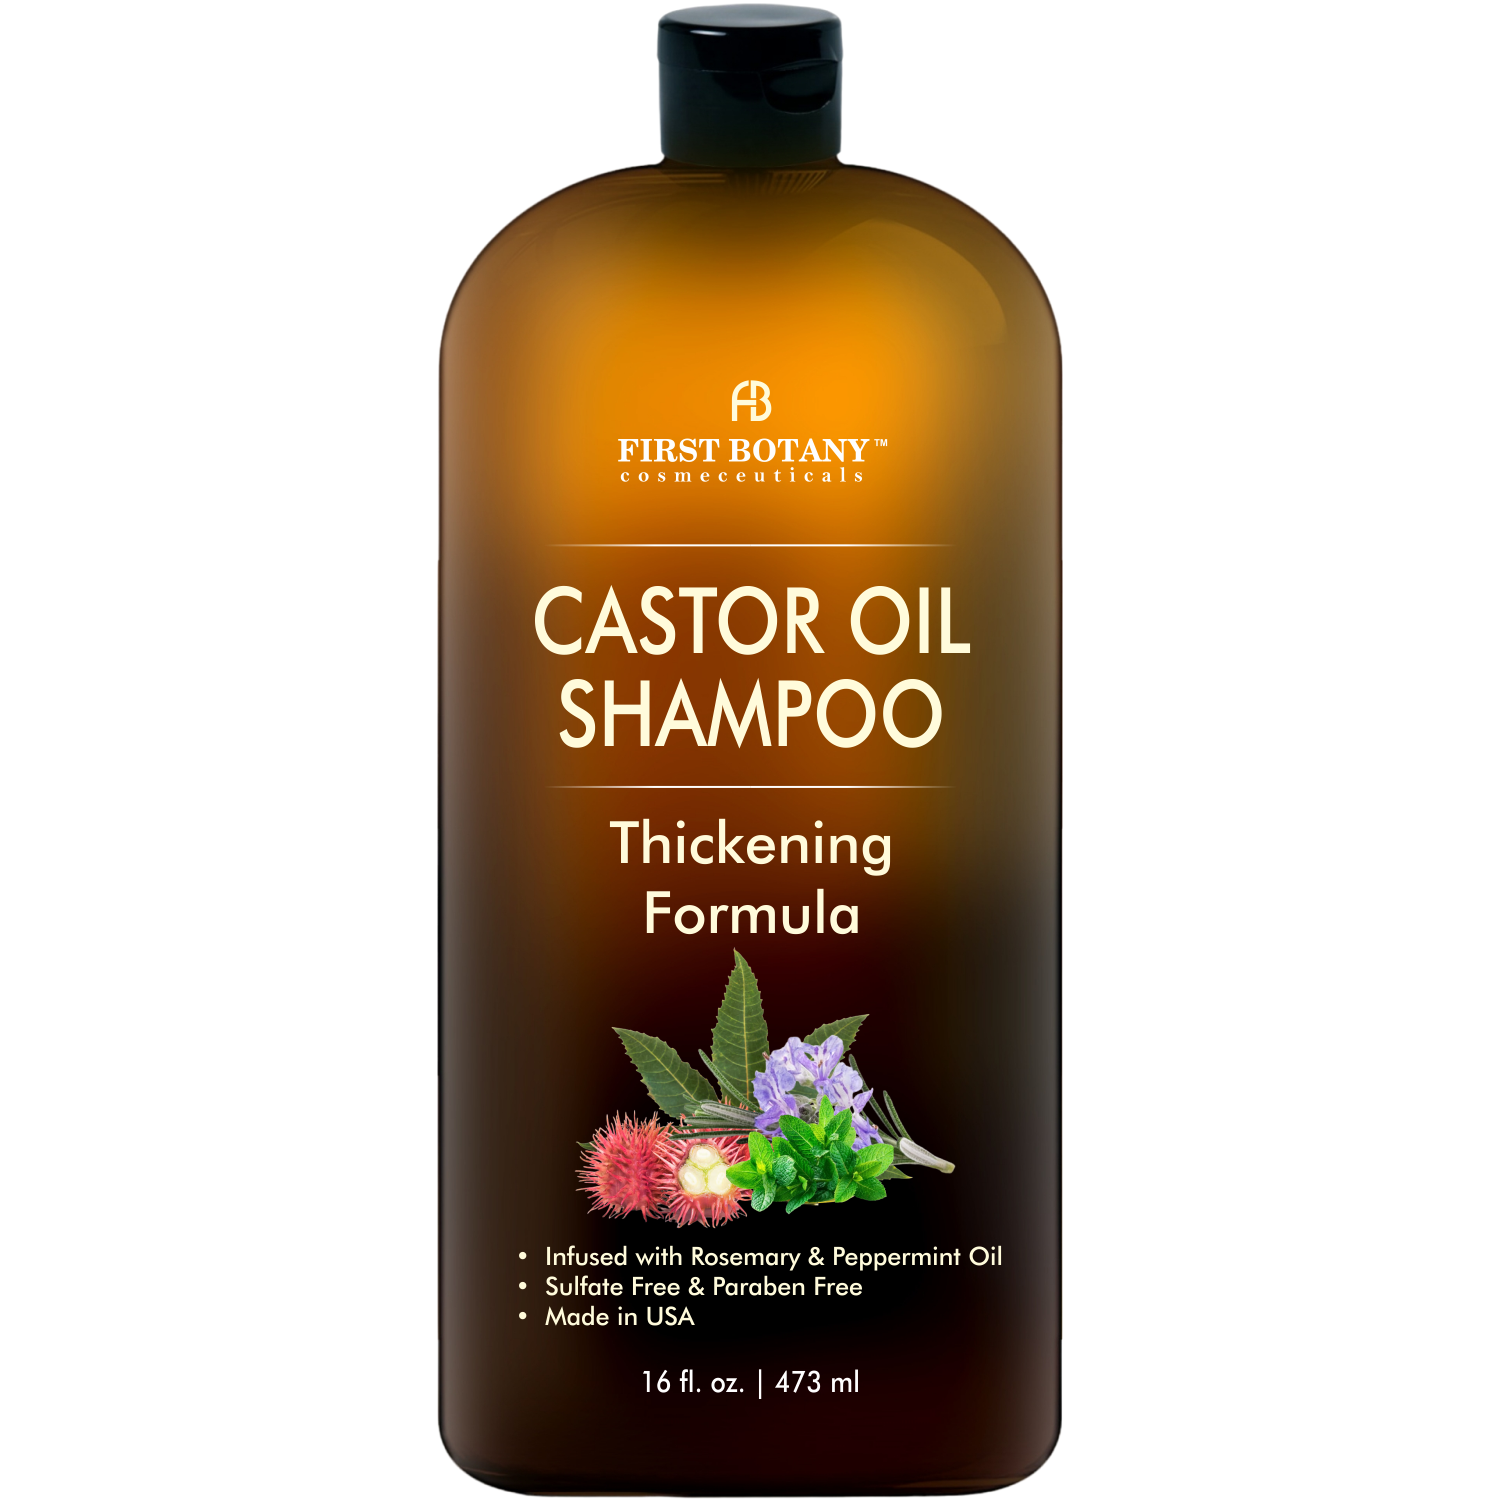 Castor Oil Shampoo and Conditioner - An Anti Hair Loss Set Thickening formula For Hair Regrowth, Anti Thinning Sulfate Free For Men & Women Anti Dandruff Treatment - 16 oz